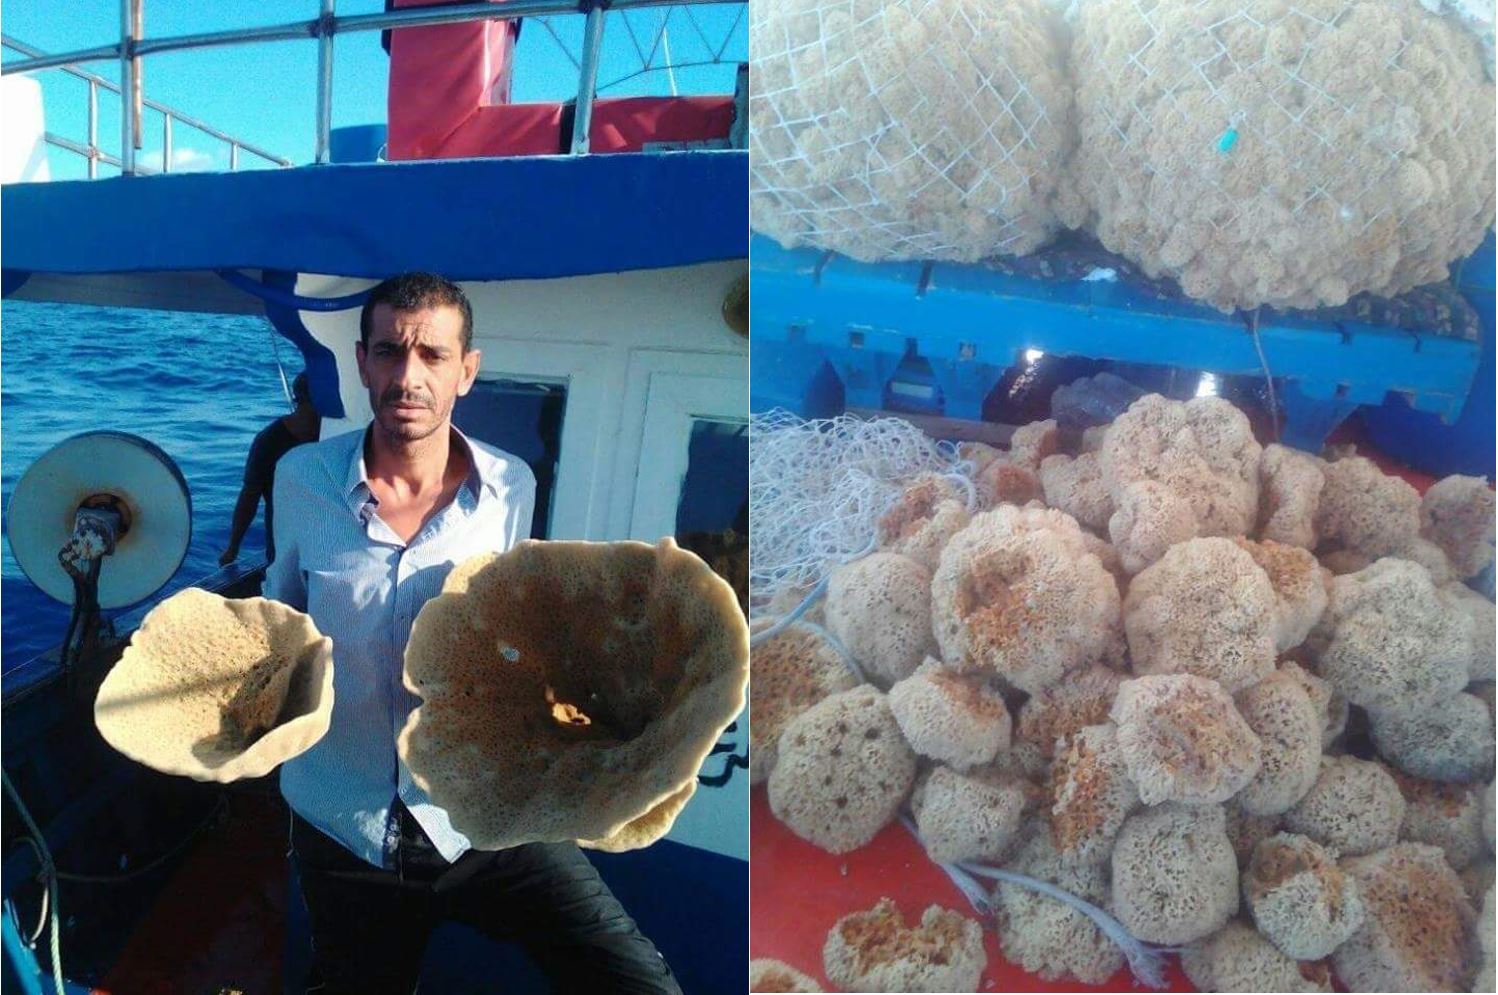 Sea Sponge, the national treasure, or Sfinz as they call it in Tunisia. Picture courtesy of Samir.